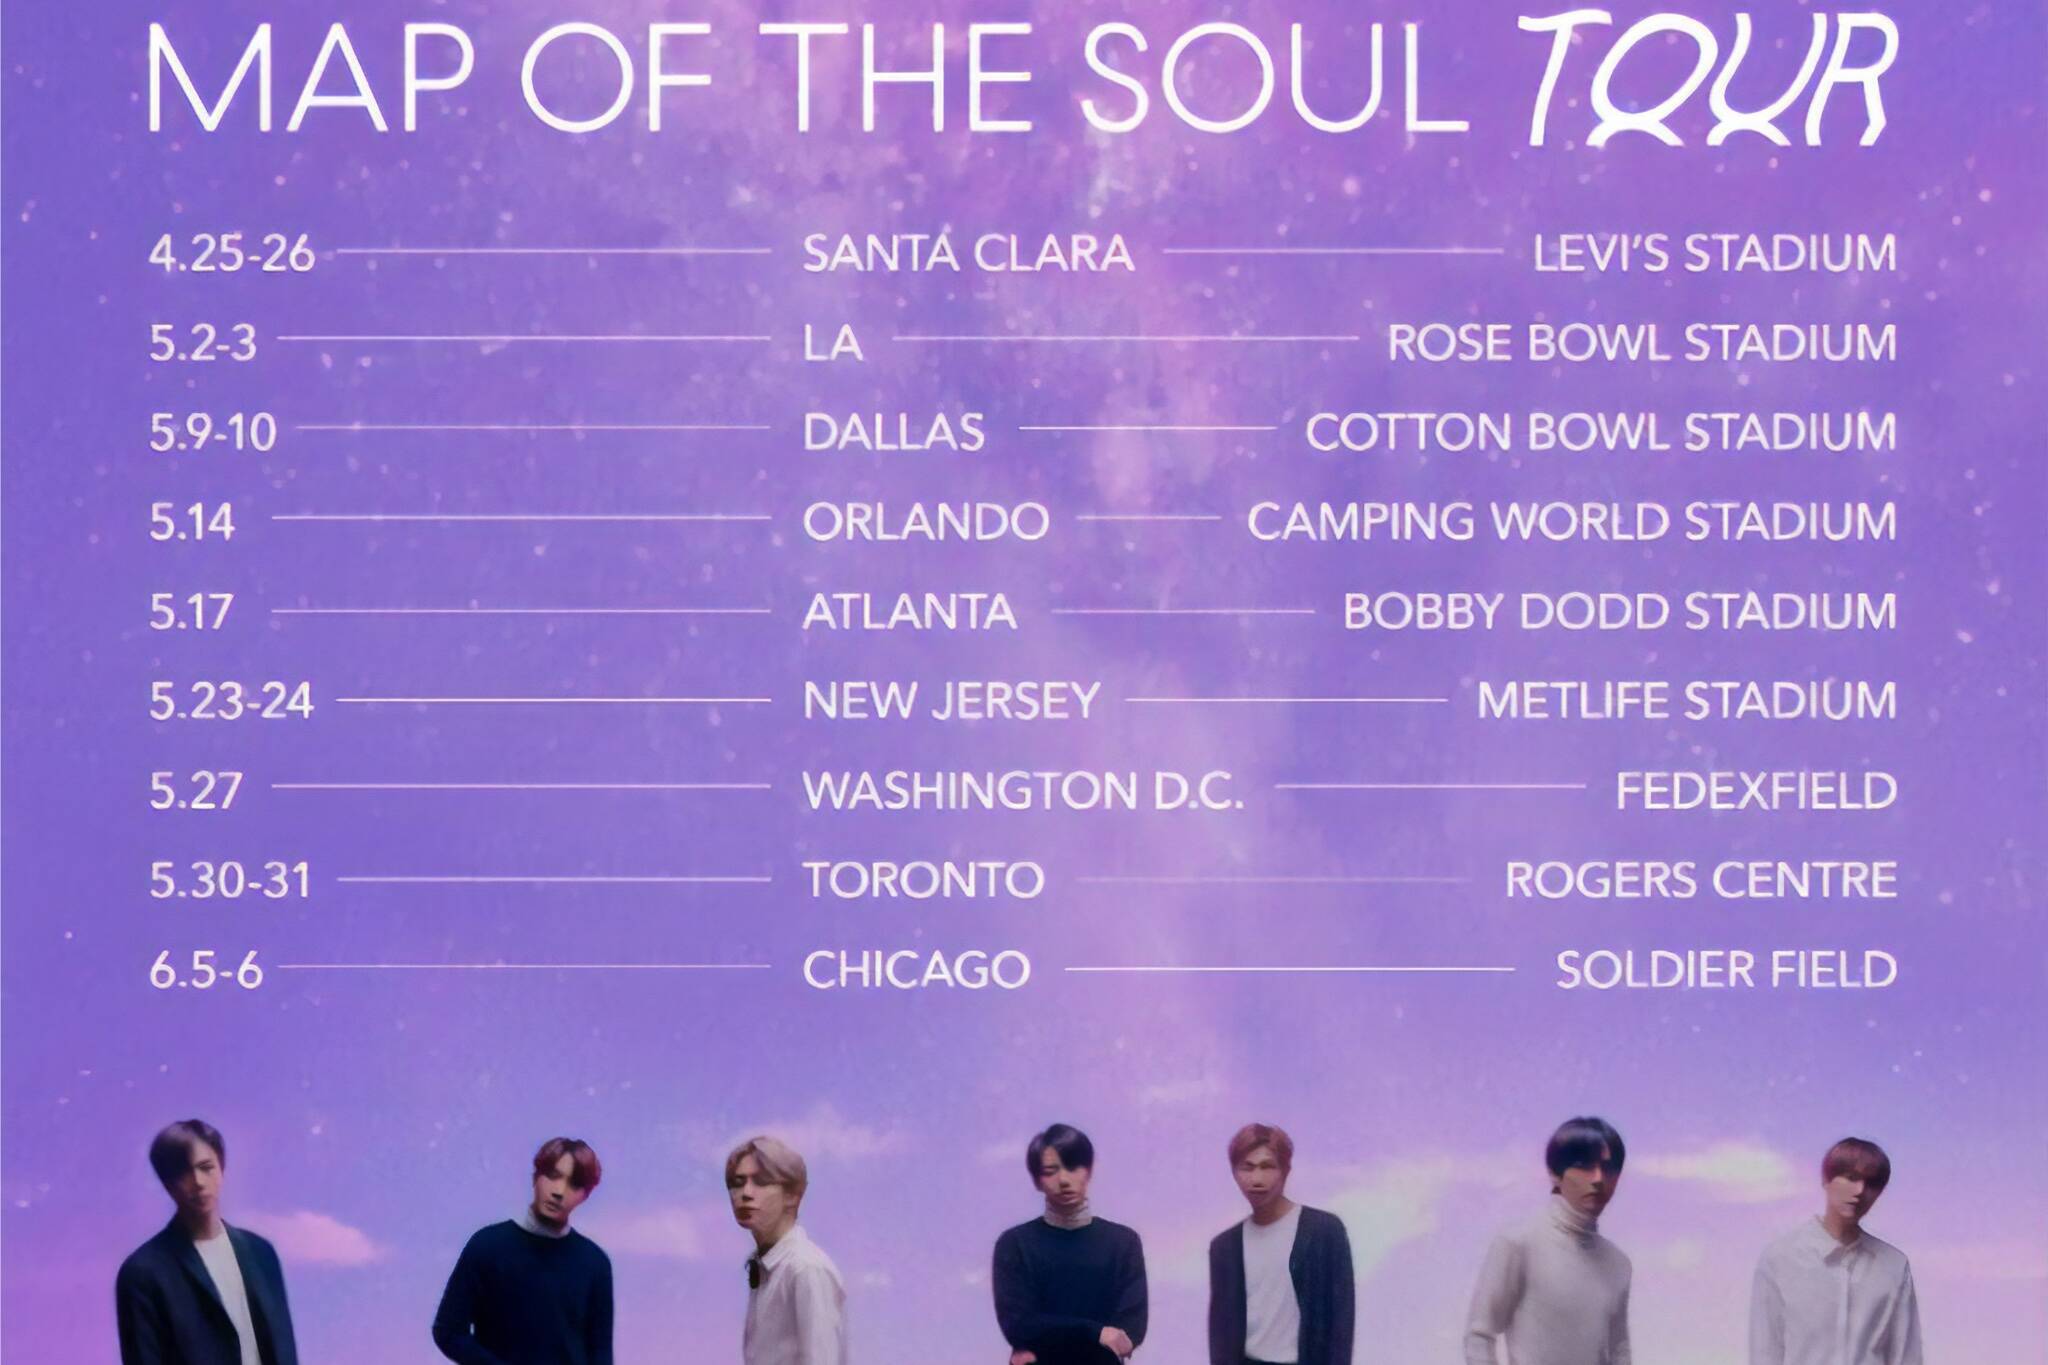 BTS is officially coming to Toronto on their 2020 concert tour and fans